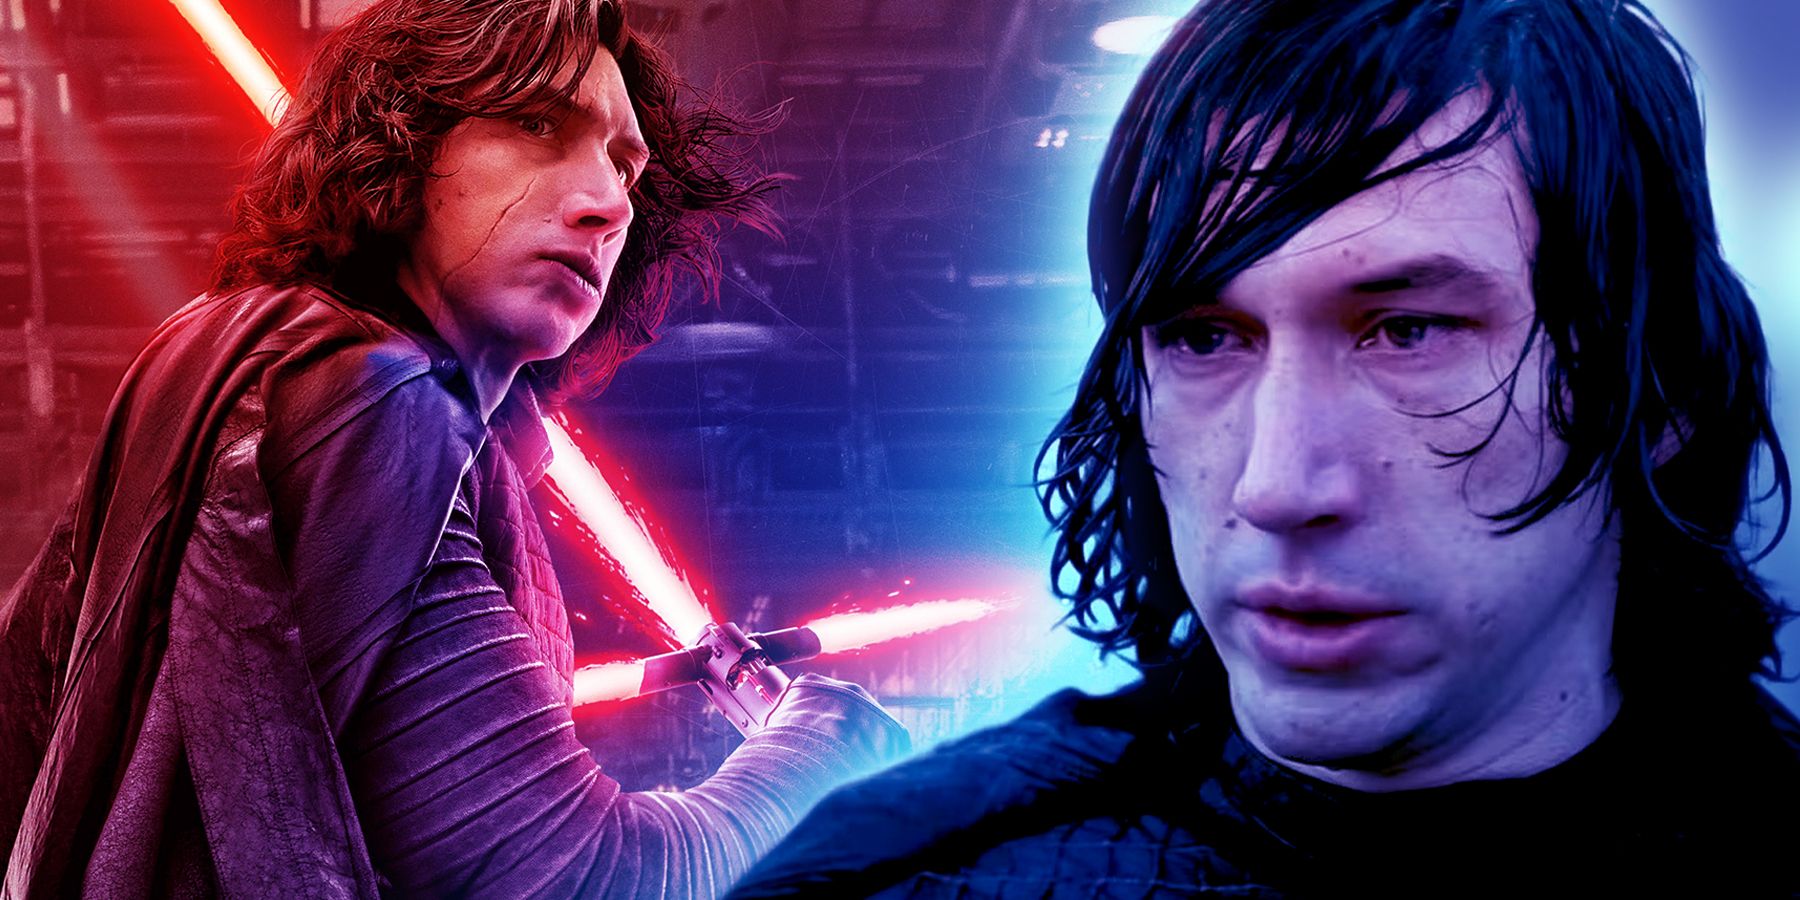 Kylo Ren with his lightsaber and Ben Solo